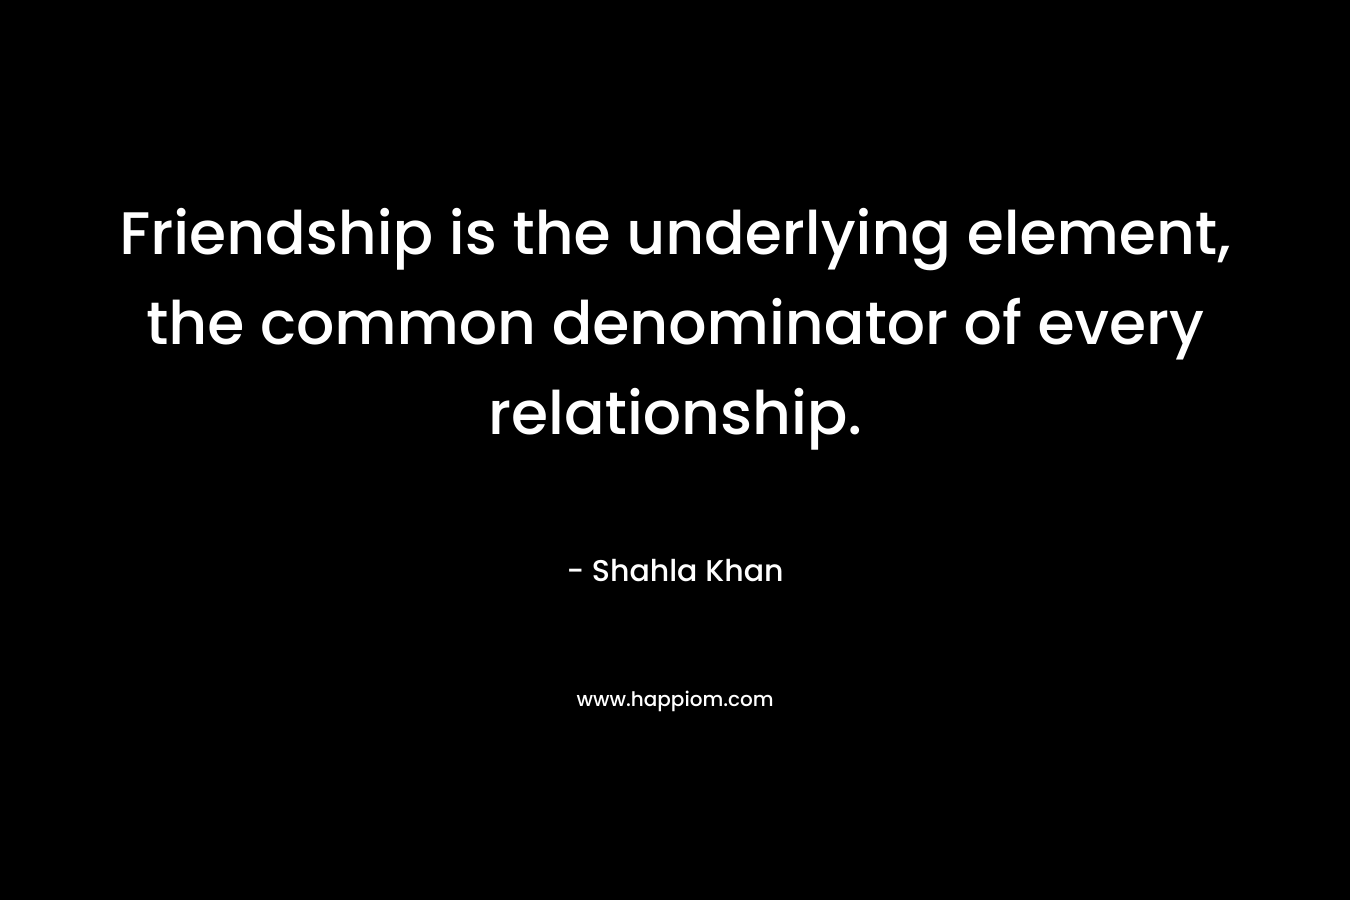 Friendship is the underlying element, the common denominator of every relationship. – Shahla Khan